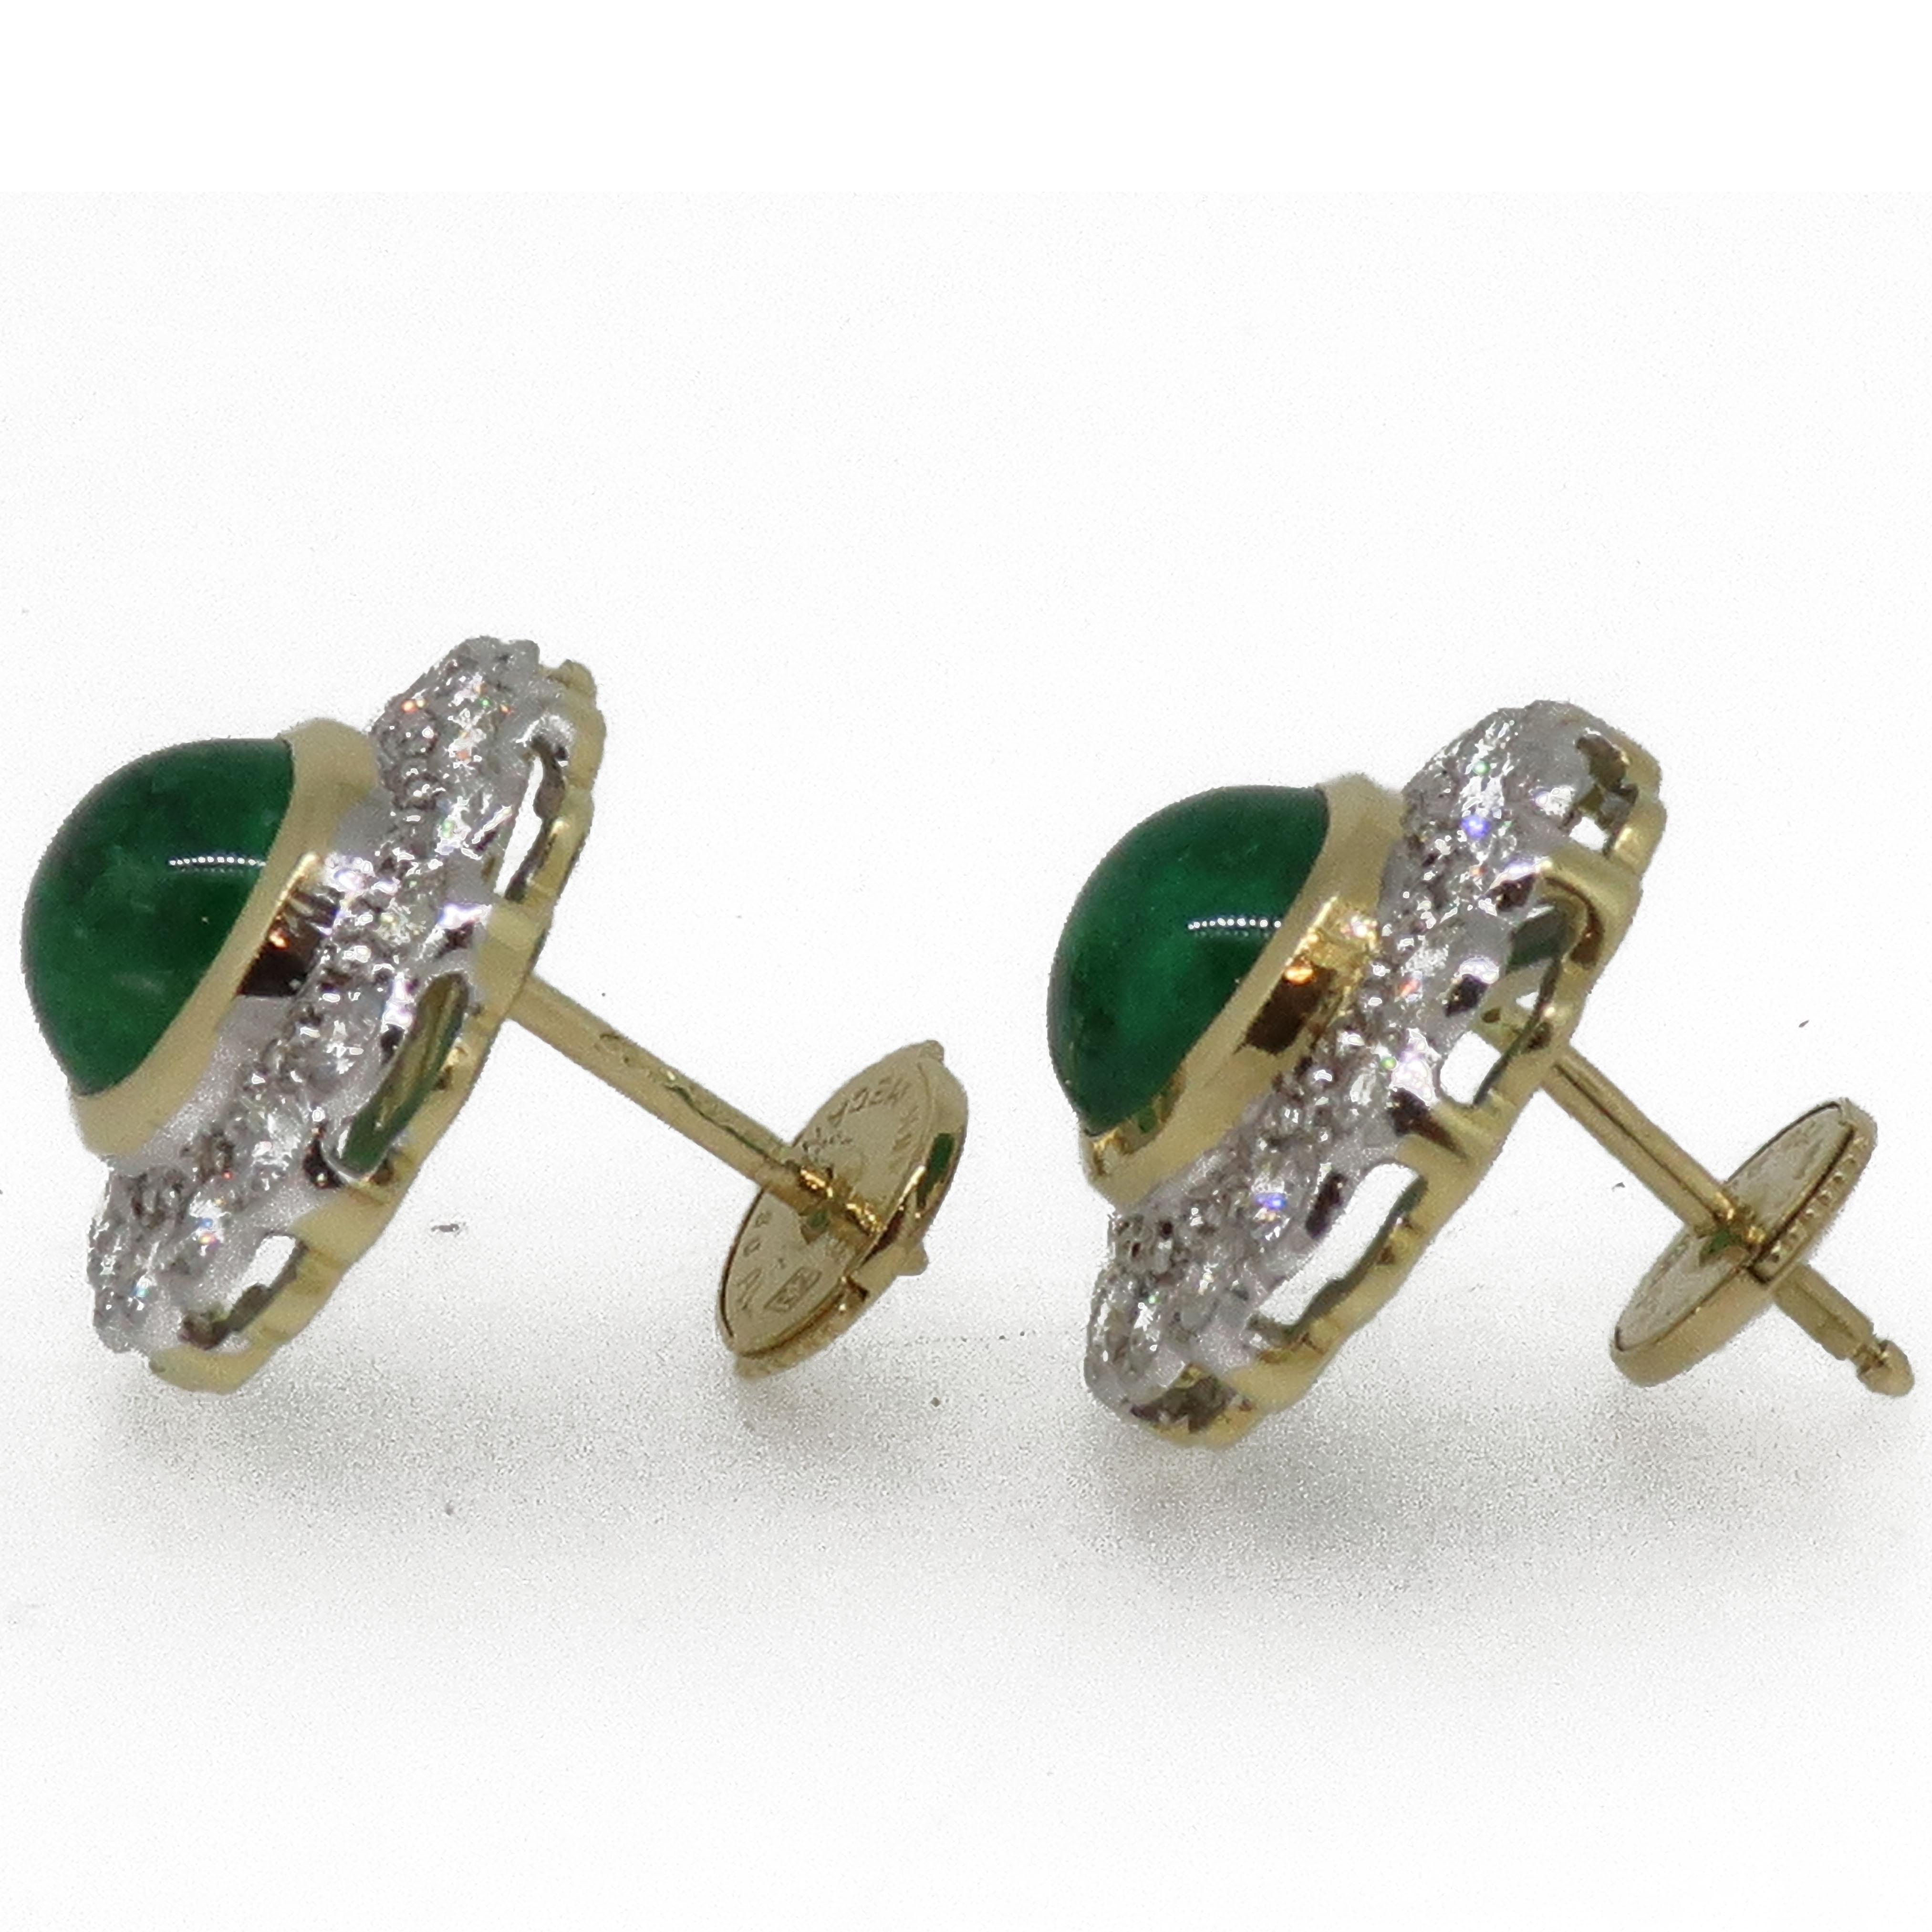 18 Karat Gold Round Cabochon Emerald & Diamond Art Deco Style Earrings.

Classic round cabochon emeralds and brilliant cut diamonds stud earrings. Central round emeralds encased in yellow gold flush setting, weighing 3.74ct in total. Surrounded by